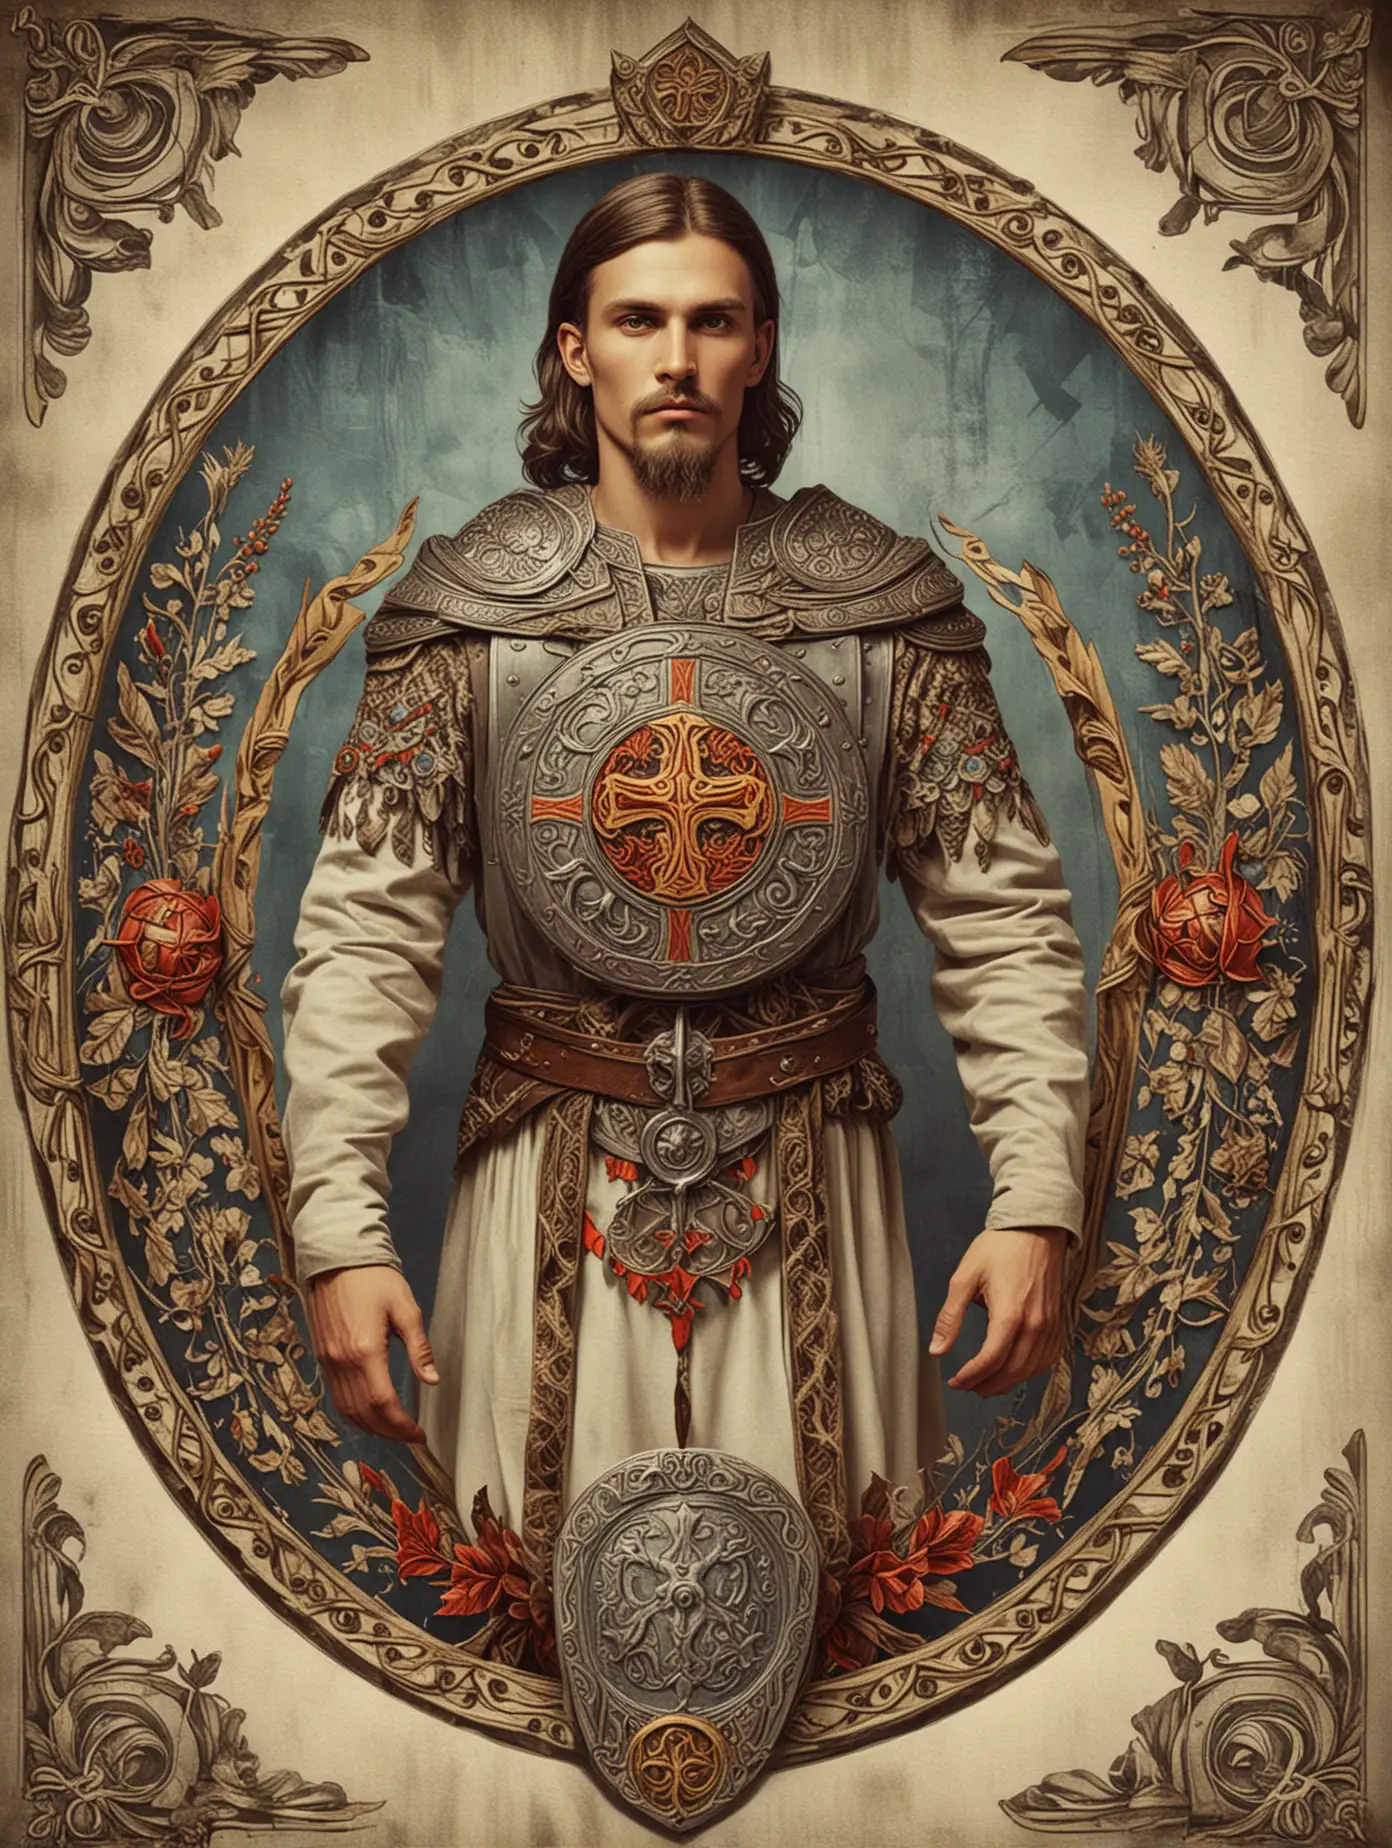 Slavic-Style-Tarot-Card-with-Symmetrical-Design-Featuring-a-Man-Holding-a-Shield